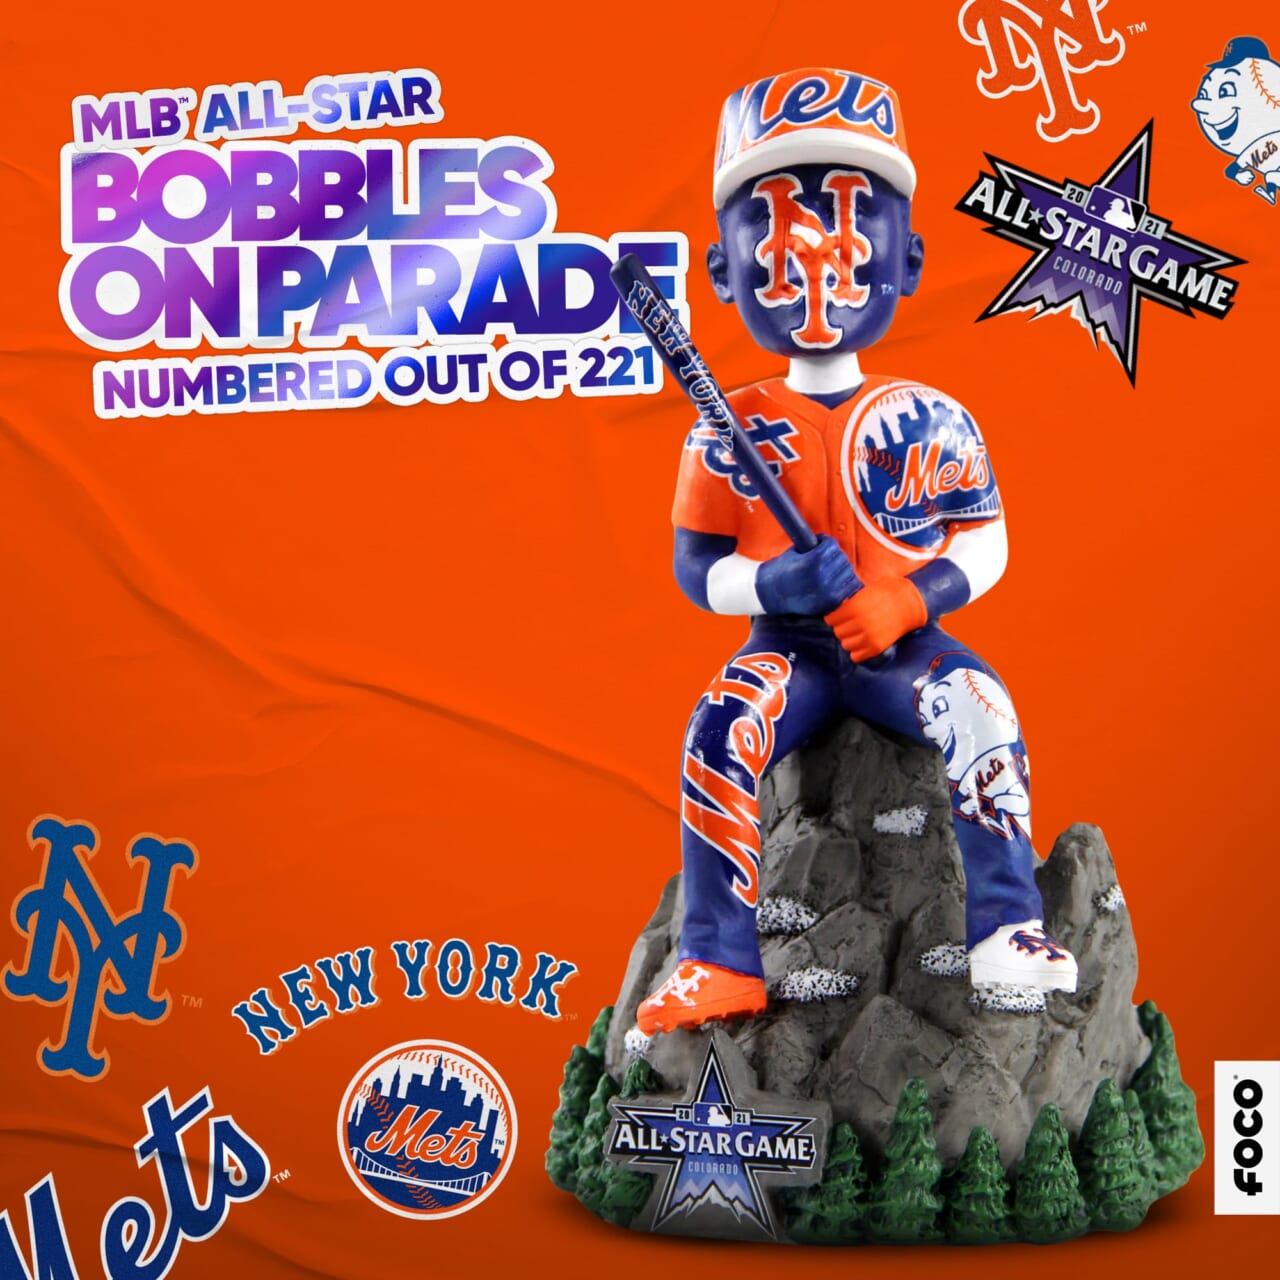 FOCO Releases New York Mets 2021 All-Star Bobble on Parade